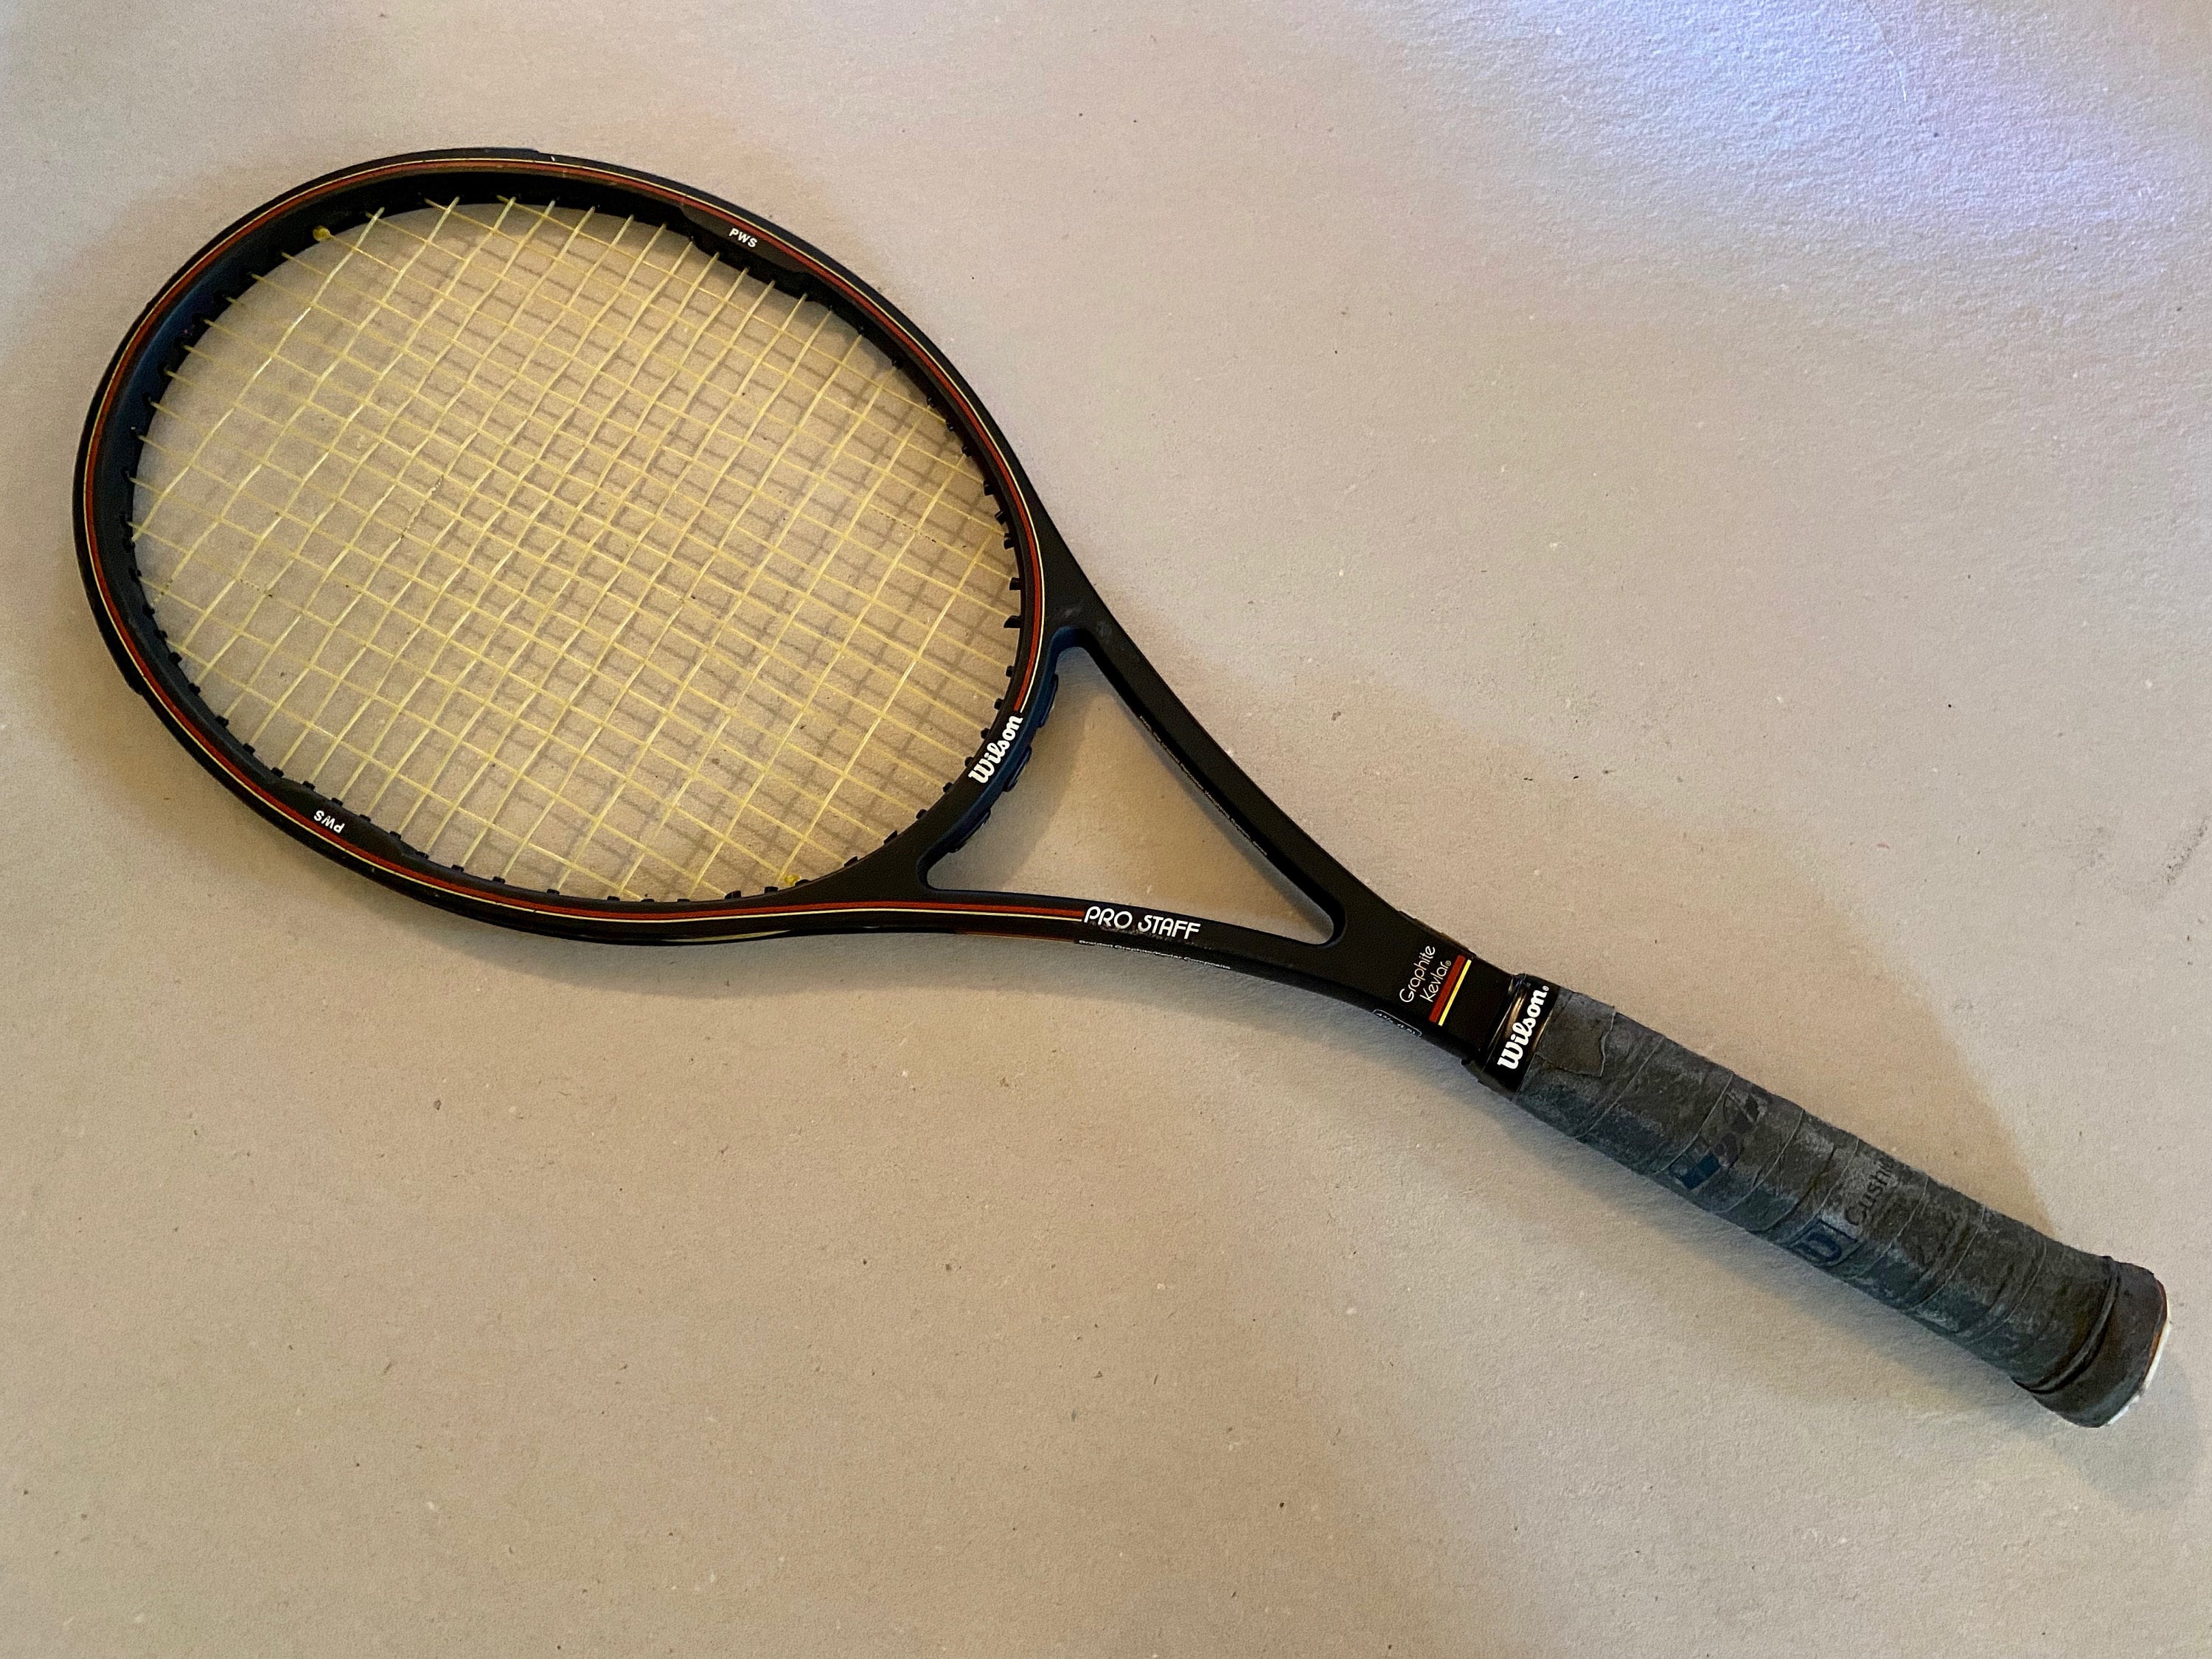 Vintage Wilson Pro Staff Midsize tennis racket with braided Graphite and  Kevlar composite - 4 5/8 LF